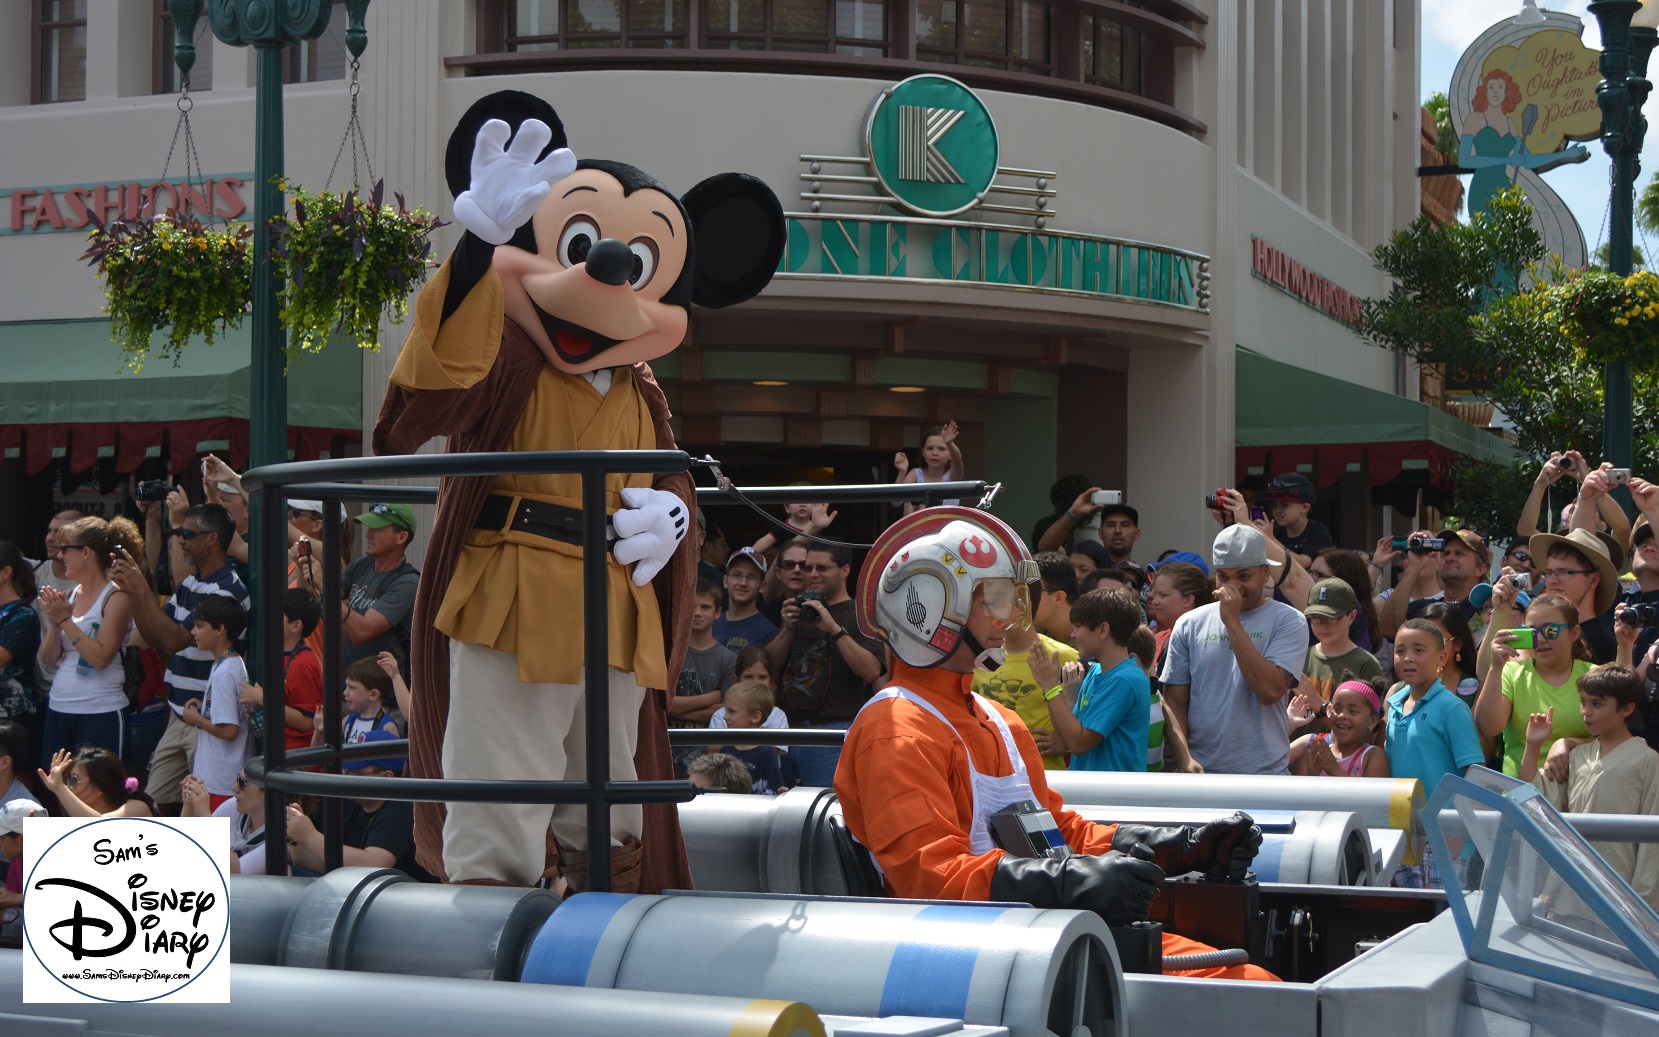 "Legends of the Force" Motorcade and Celebrity Welcome, Jedi Mickey leads the parade.